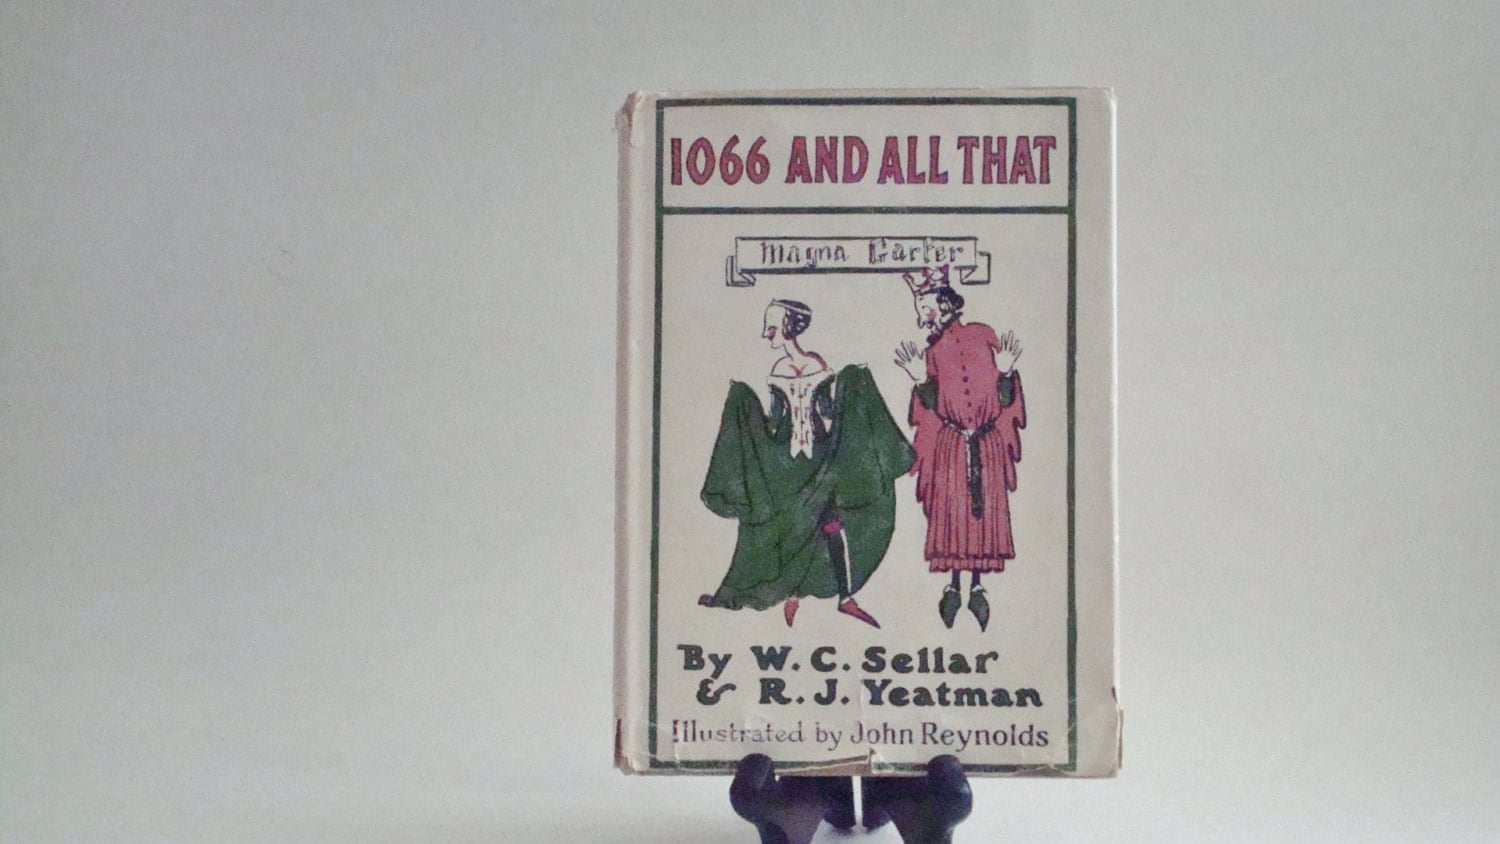 1066 and All That by W.C. Sellar